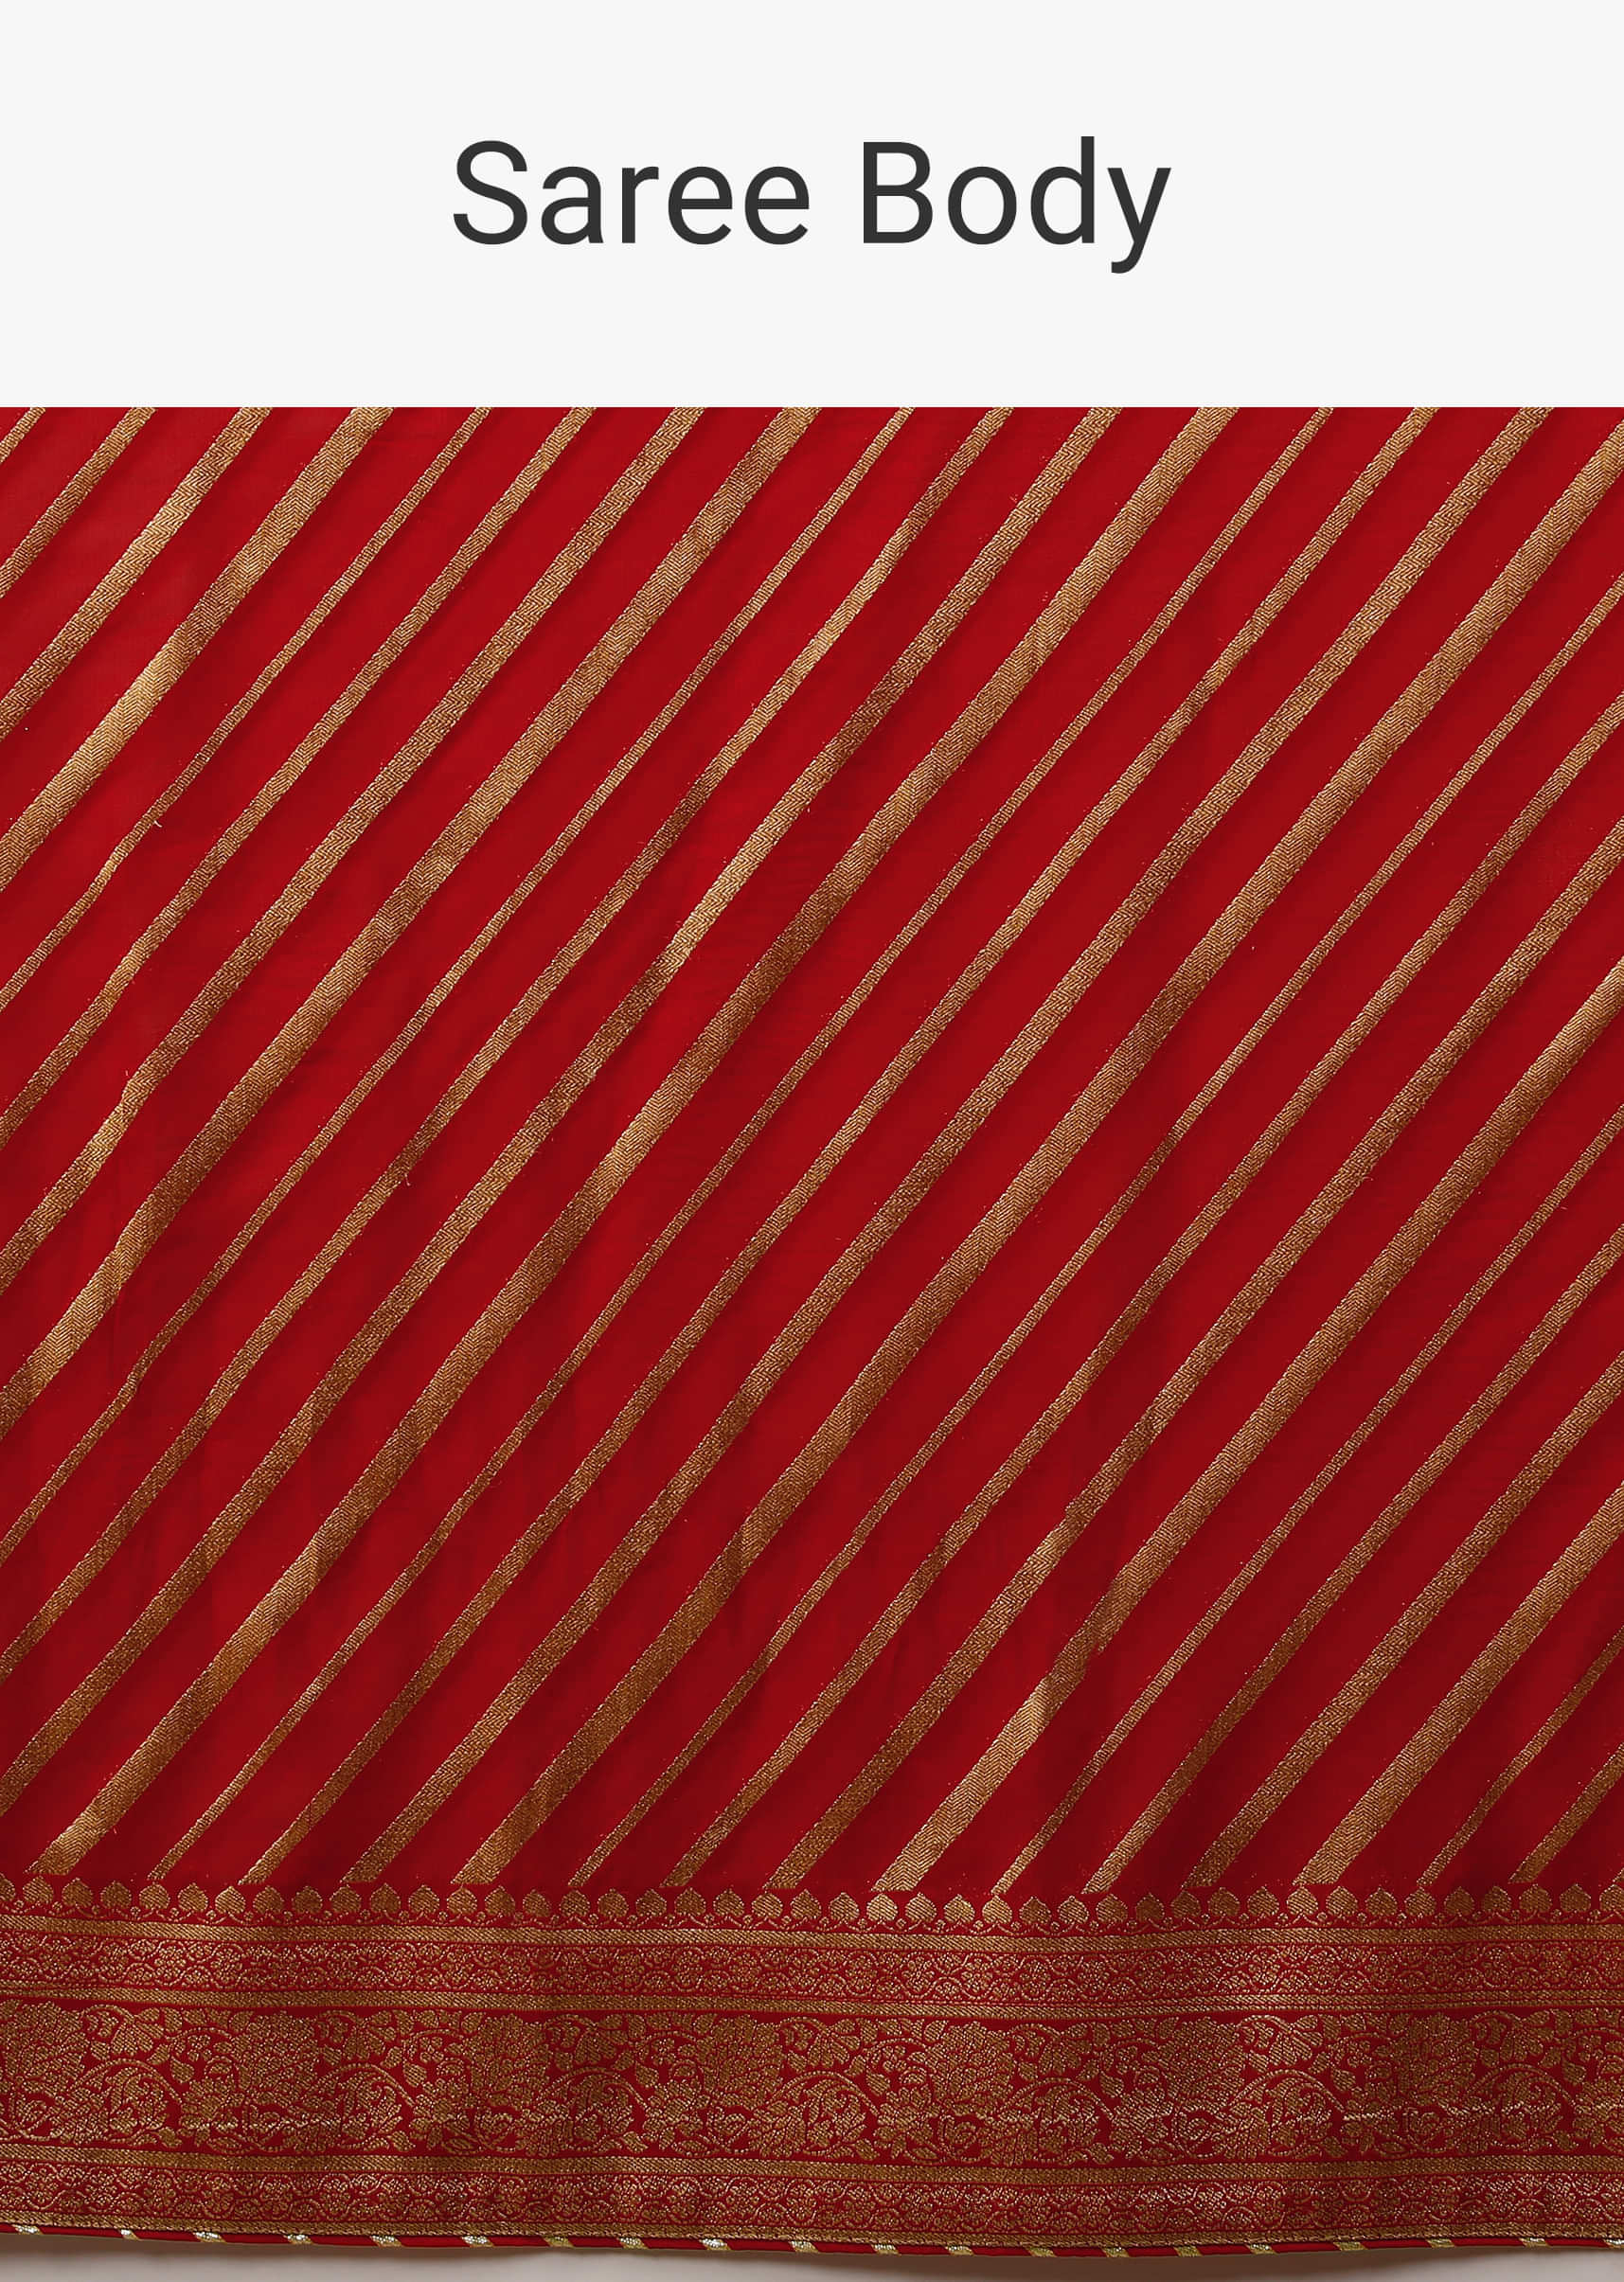 Tomato Red Saree In Georgette With Brocade Woven Diagonal Stripes And Floral Border  